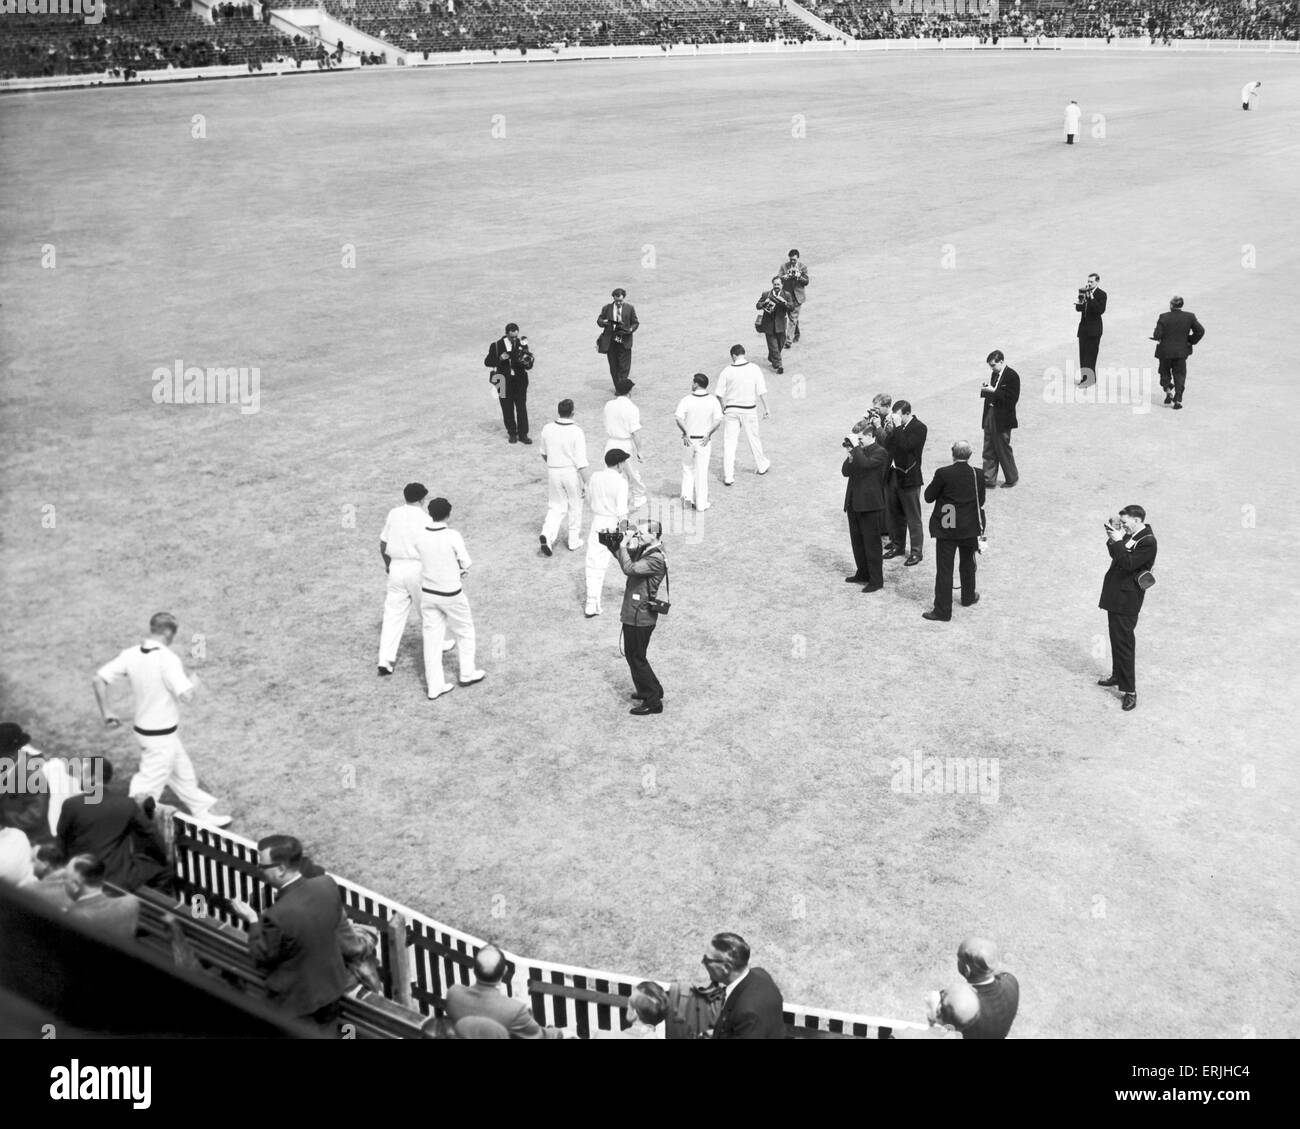 Australian cricket tour of England for the Ashes. England v Australia First Test match at Edgbaston. Australian team walks out onto the field met by the press. 10th June 1961. Stock Photo